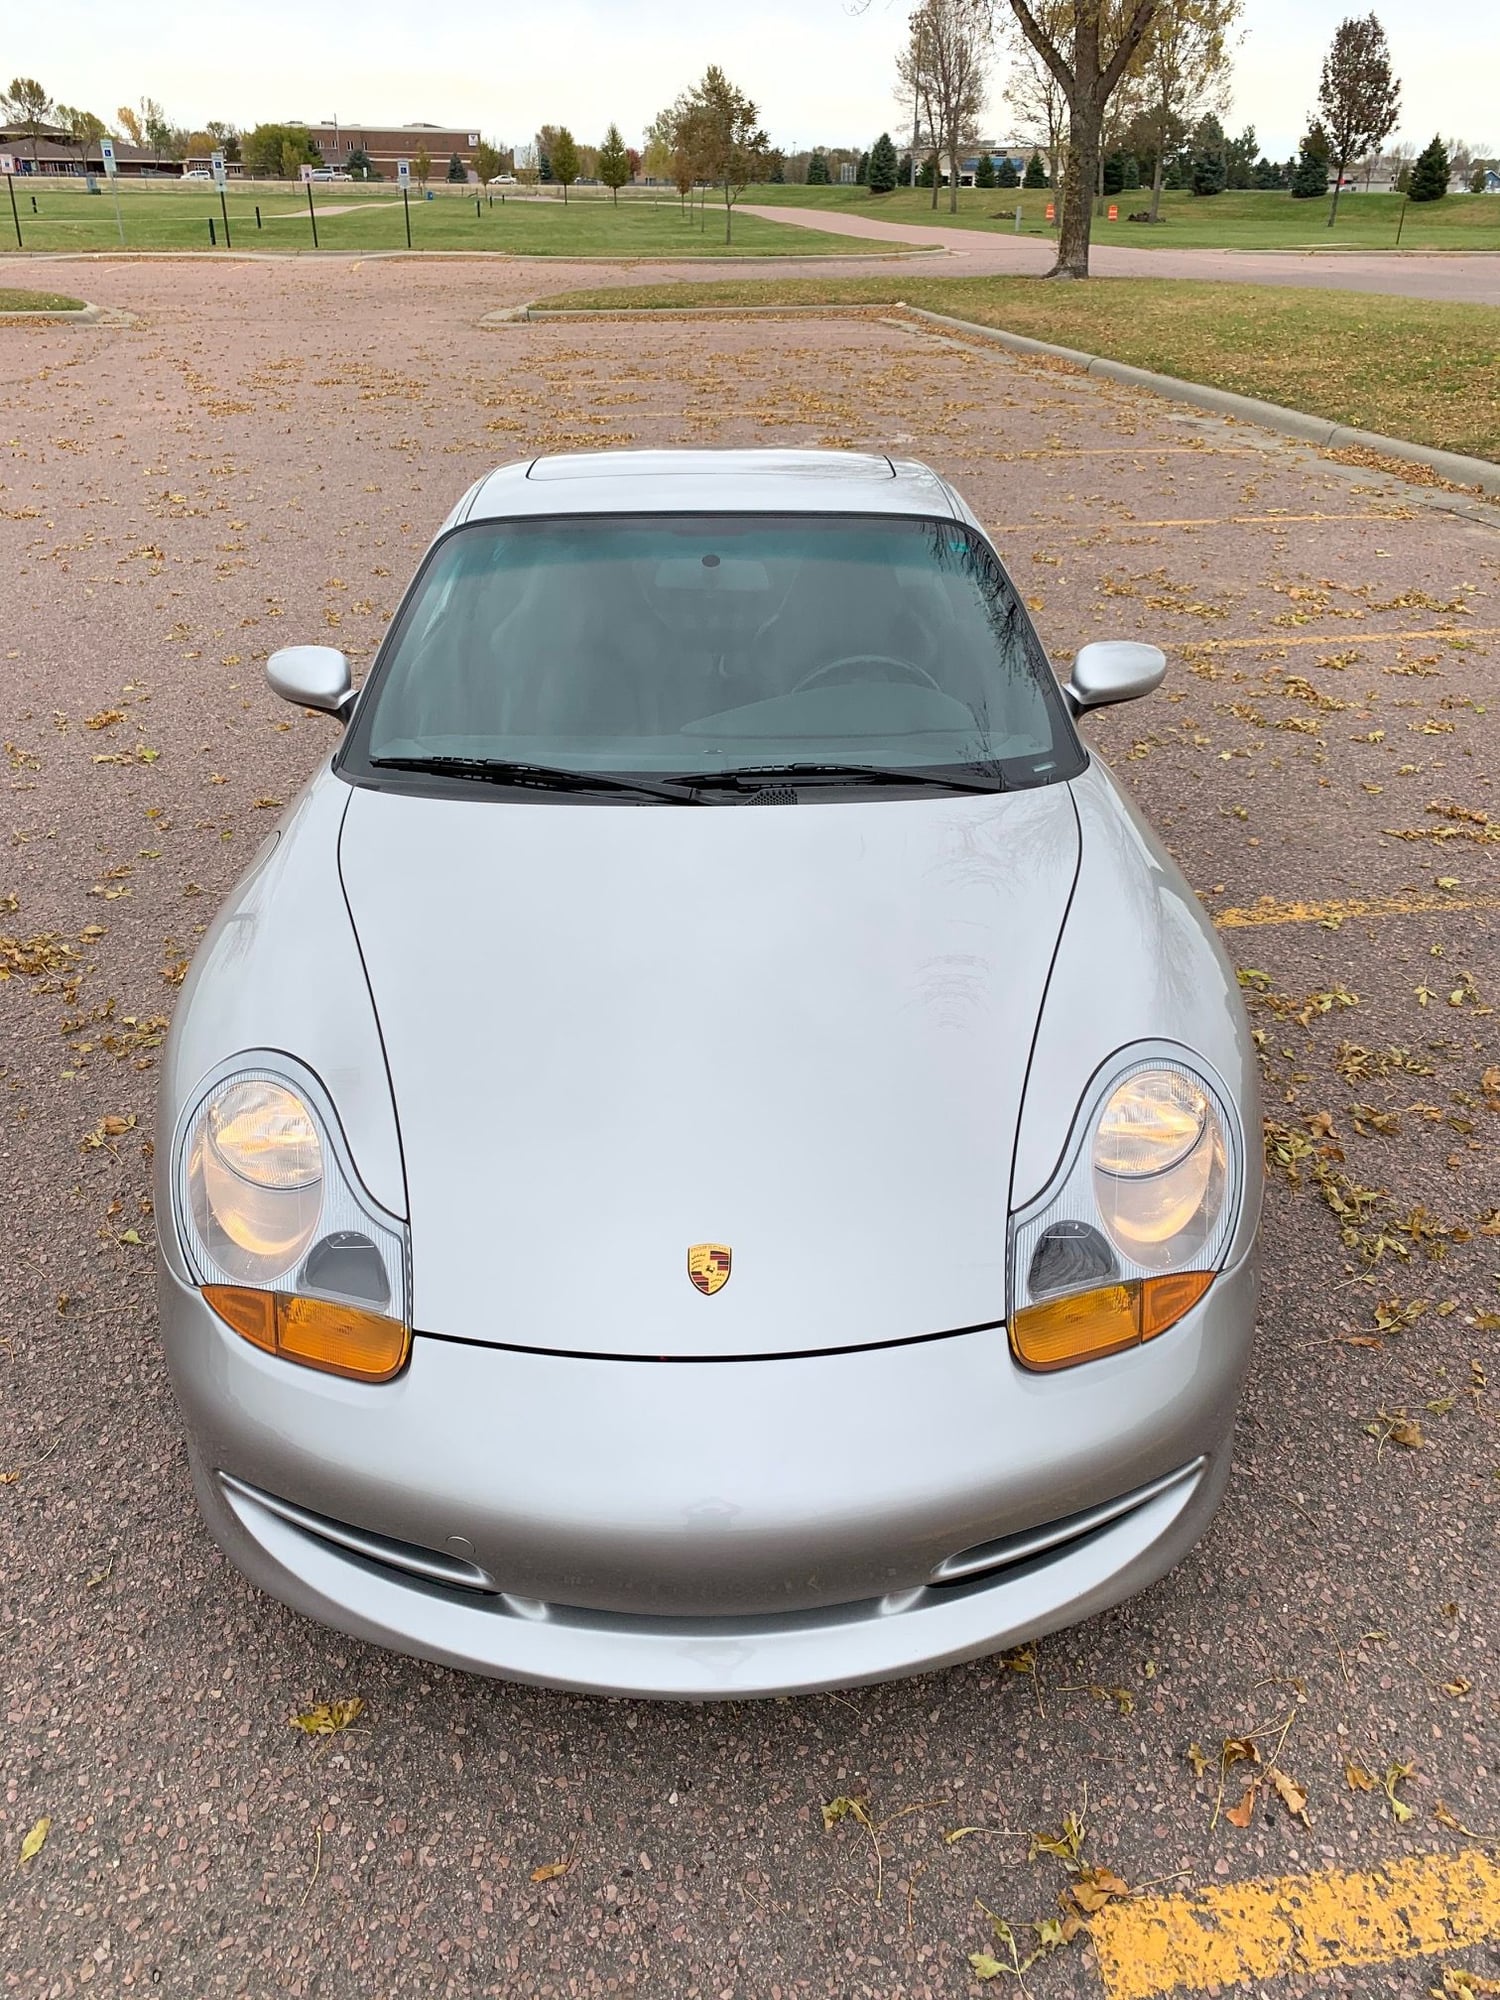 1999 Porsche 911 - 1999 Factory Aerokit 911 17,xxx Original Miles - Used - VIN WP0AA2998XS622665 - 19,000 Miles - 6 cyl - 2WD - Manual - Coupe - Silver - Sioux Falls, SD 57103, United States